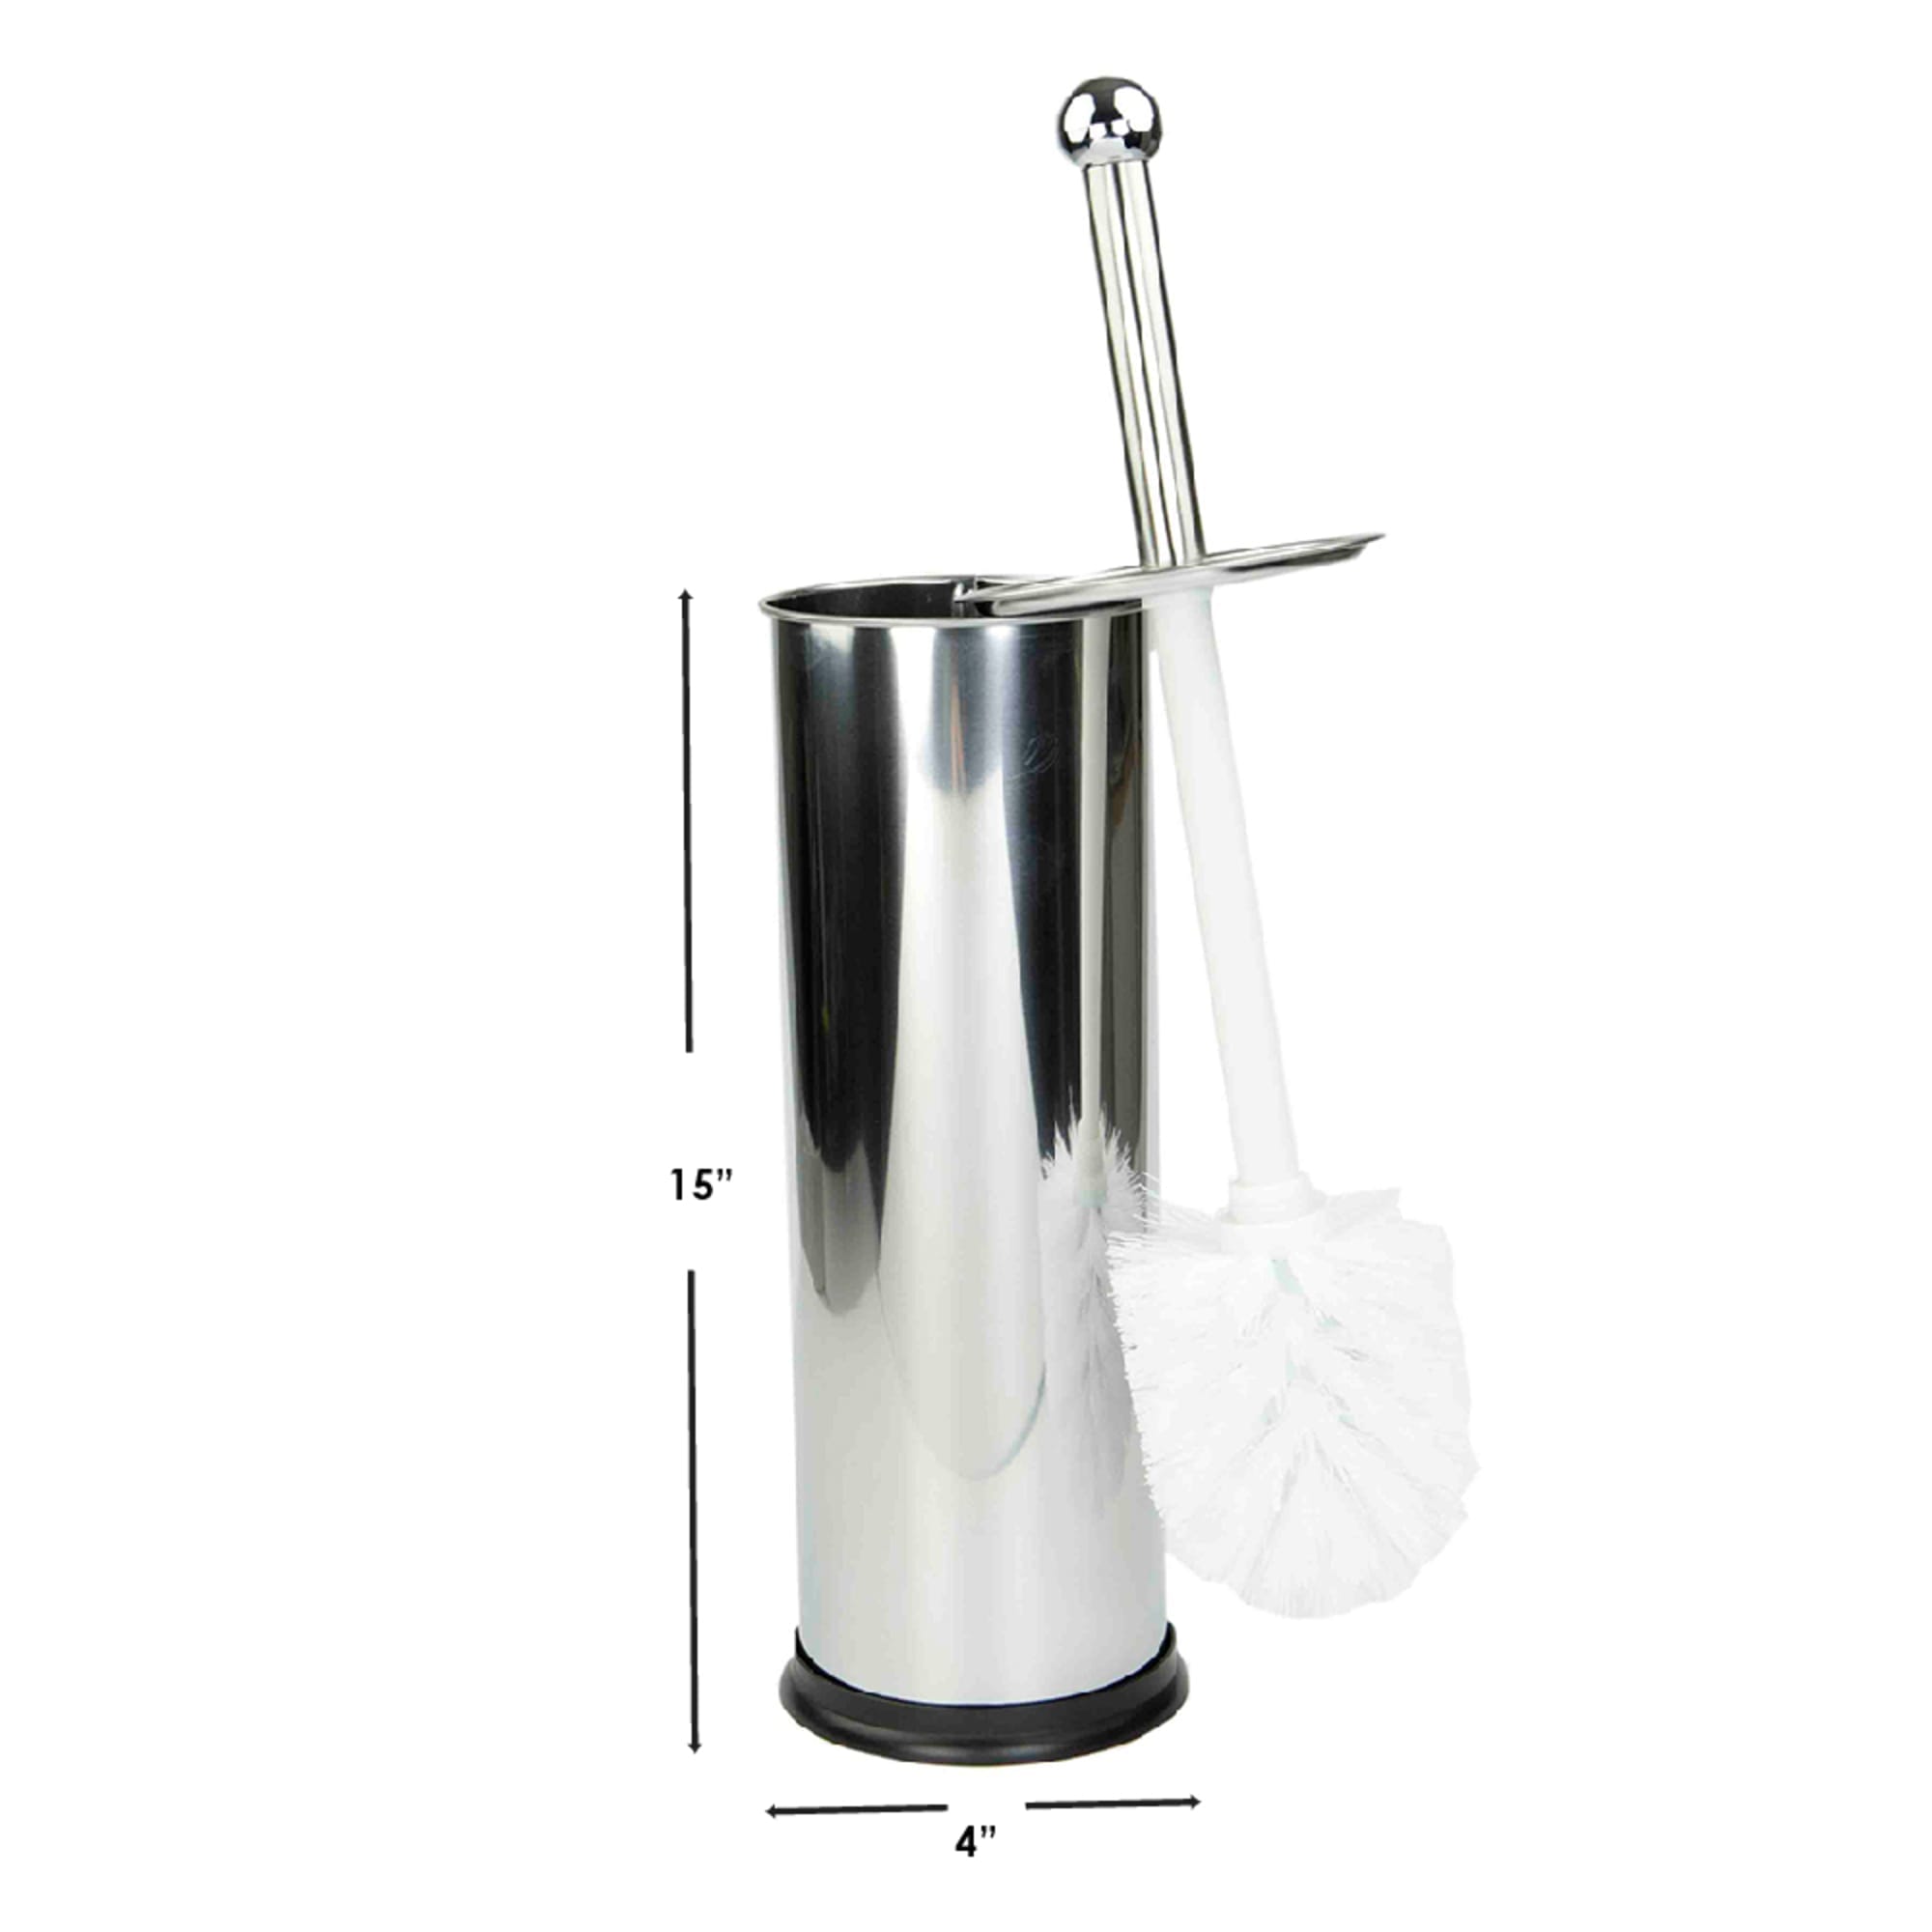 Home Basics Hide-Away and Splash Proof Polished Stainless Steel Toilet Brush with Non-Skid Hygienic Holder, Silver $4.00 EACH, CASE PACK OF 12